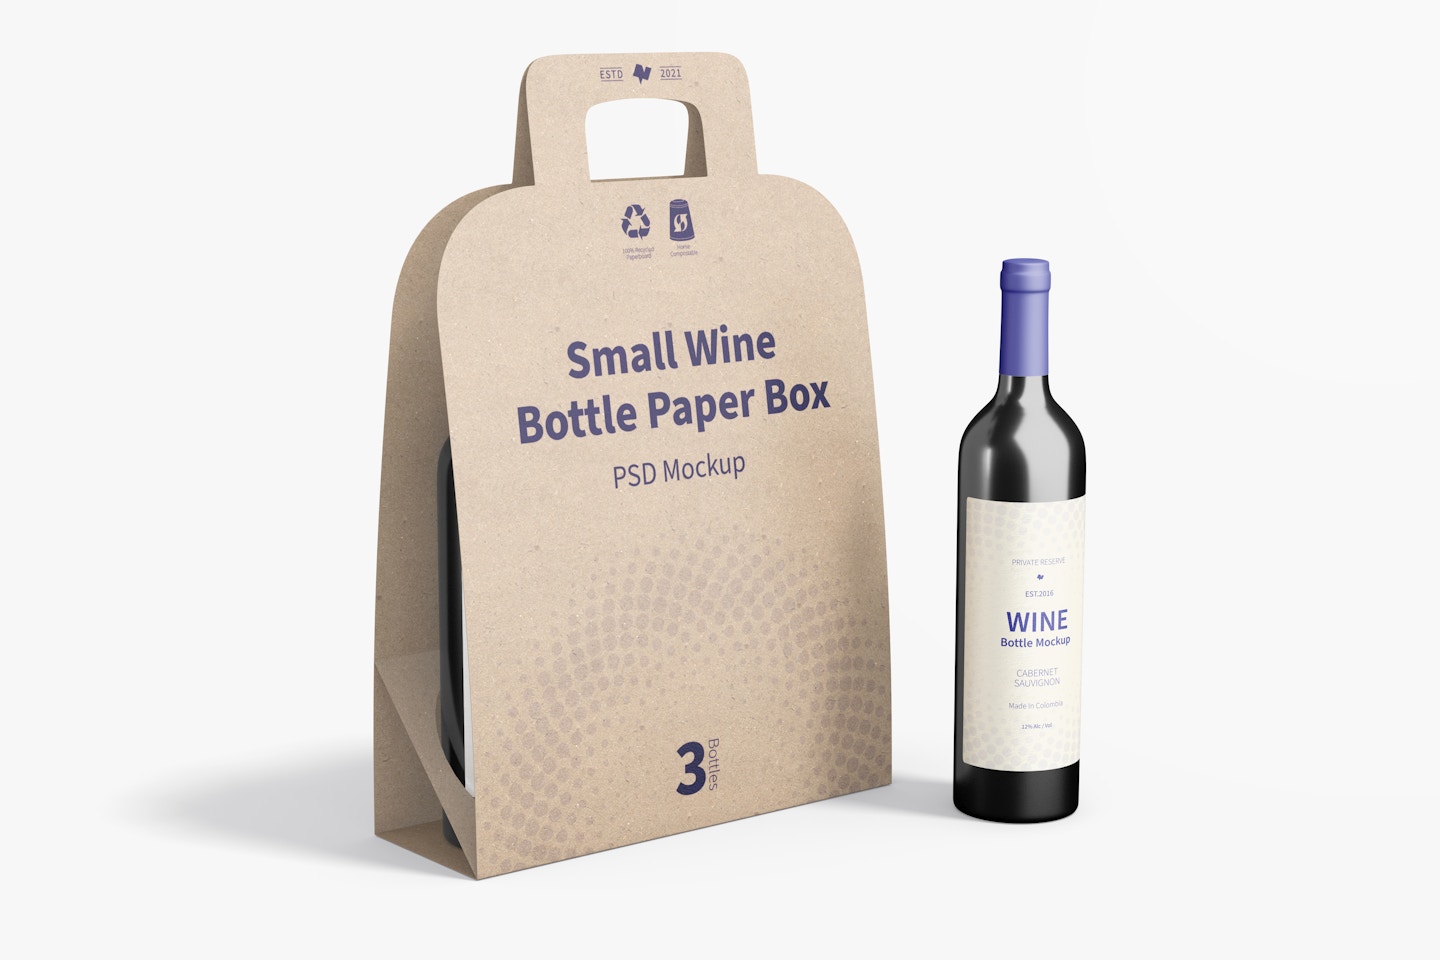 Small Wine Bottle Paper Box Mockup, Right View